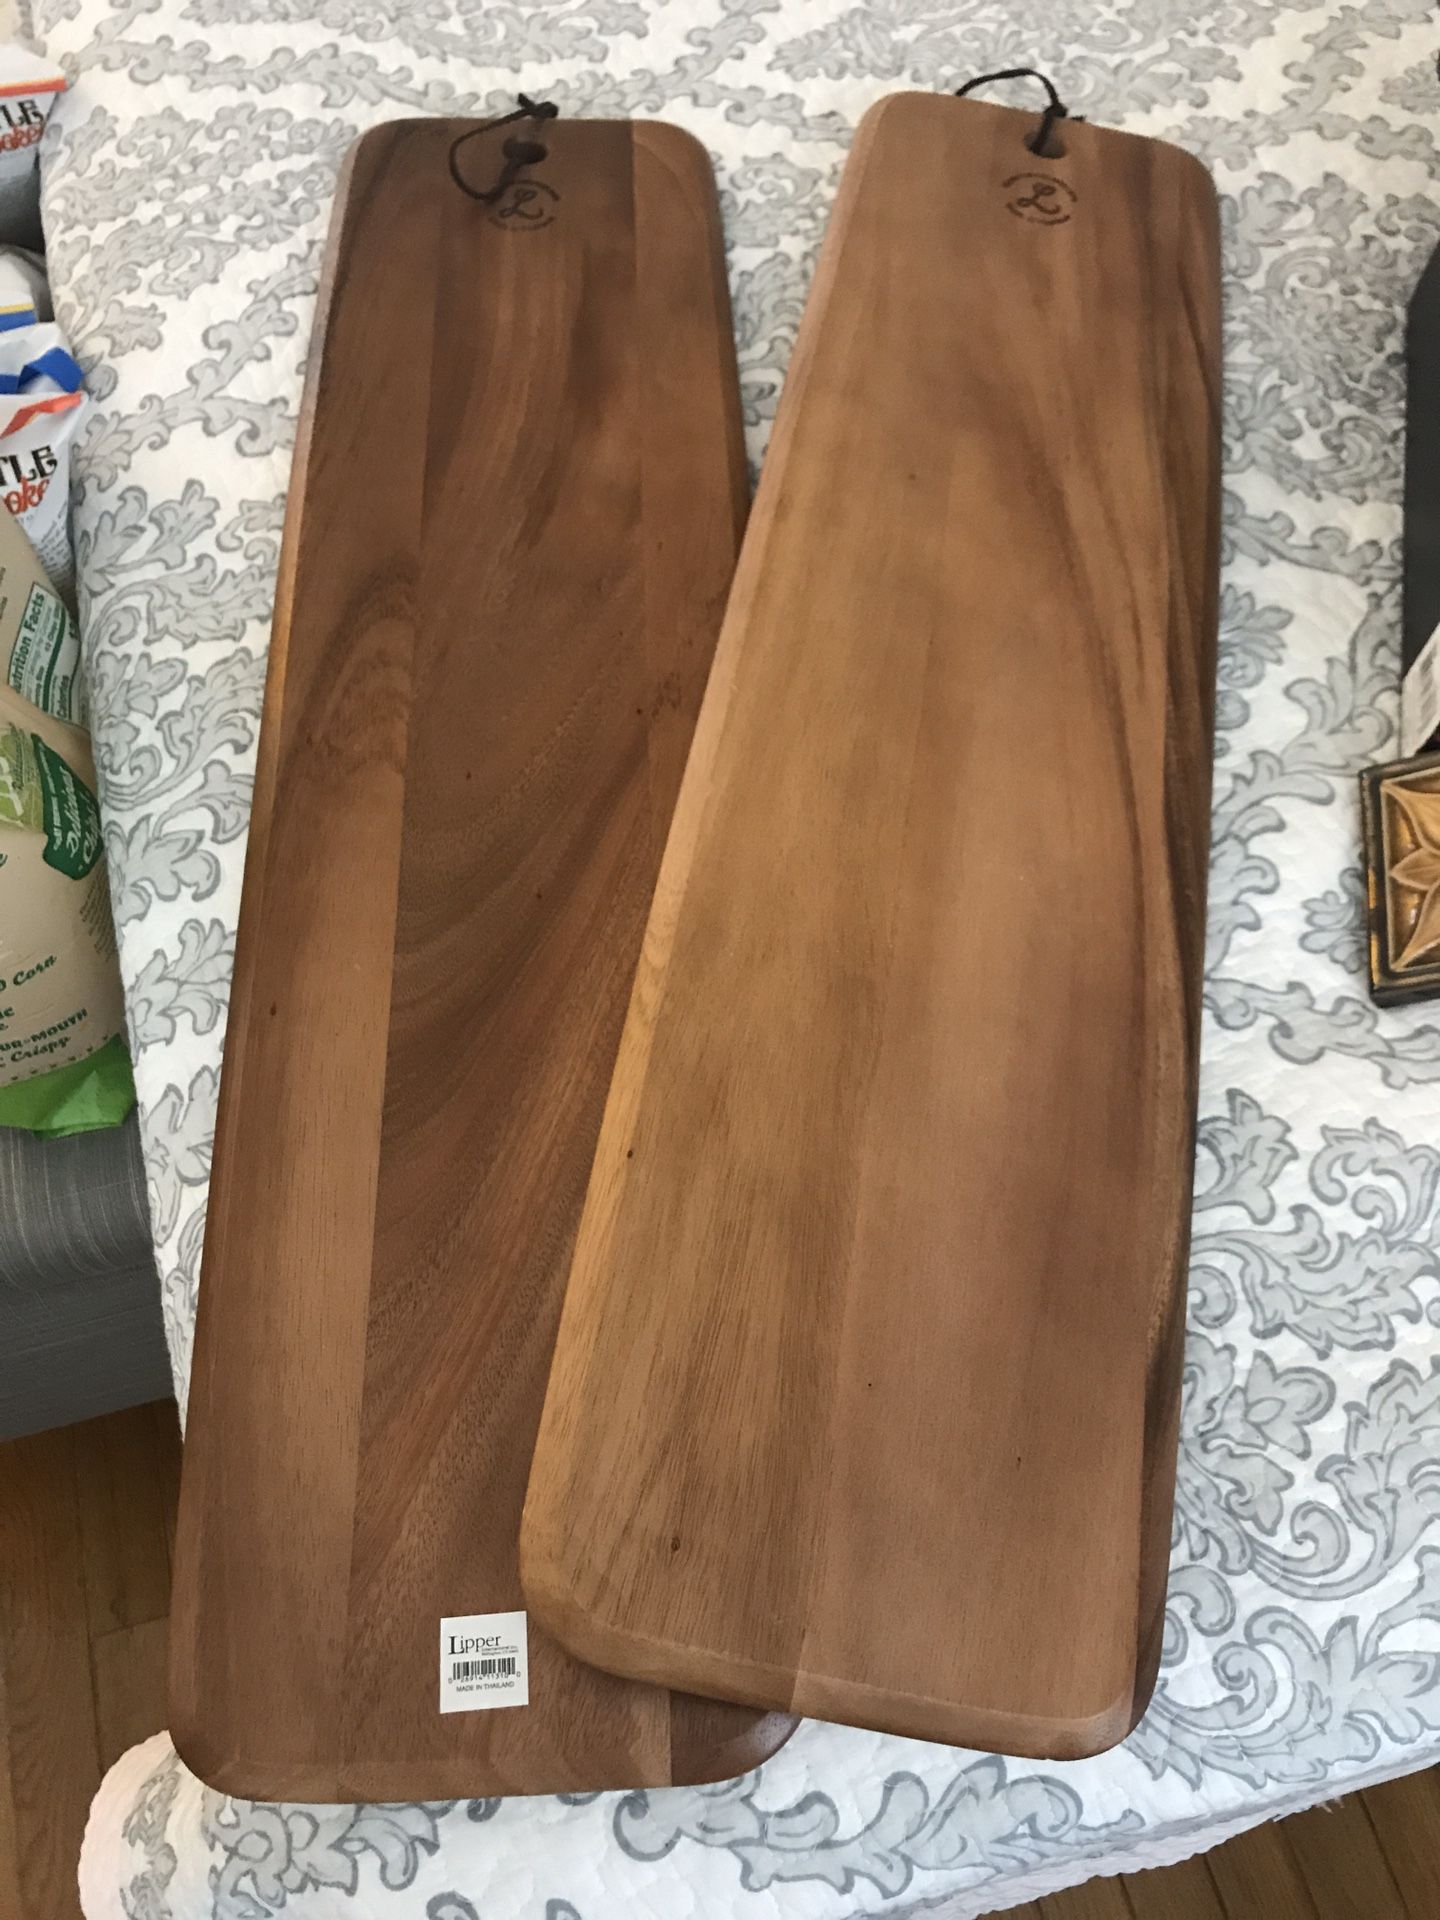 Extra long 36” wood boards-brand new